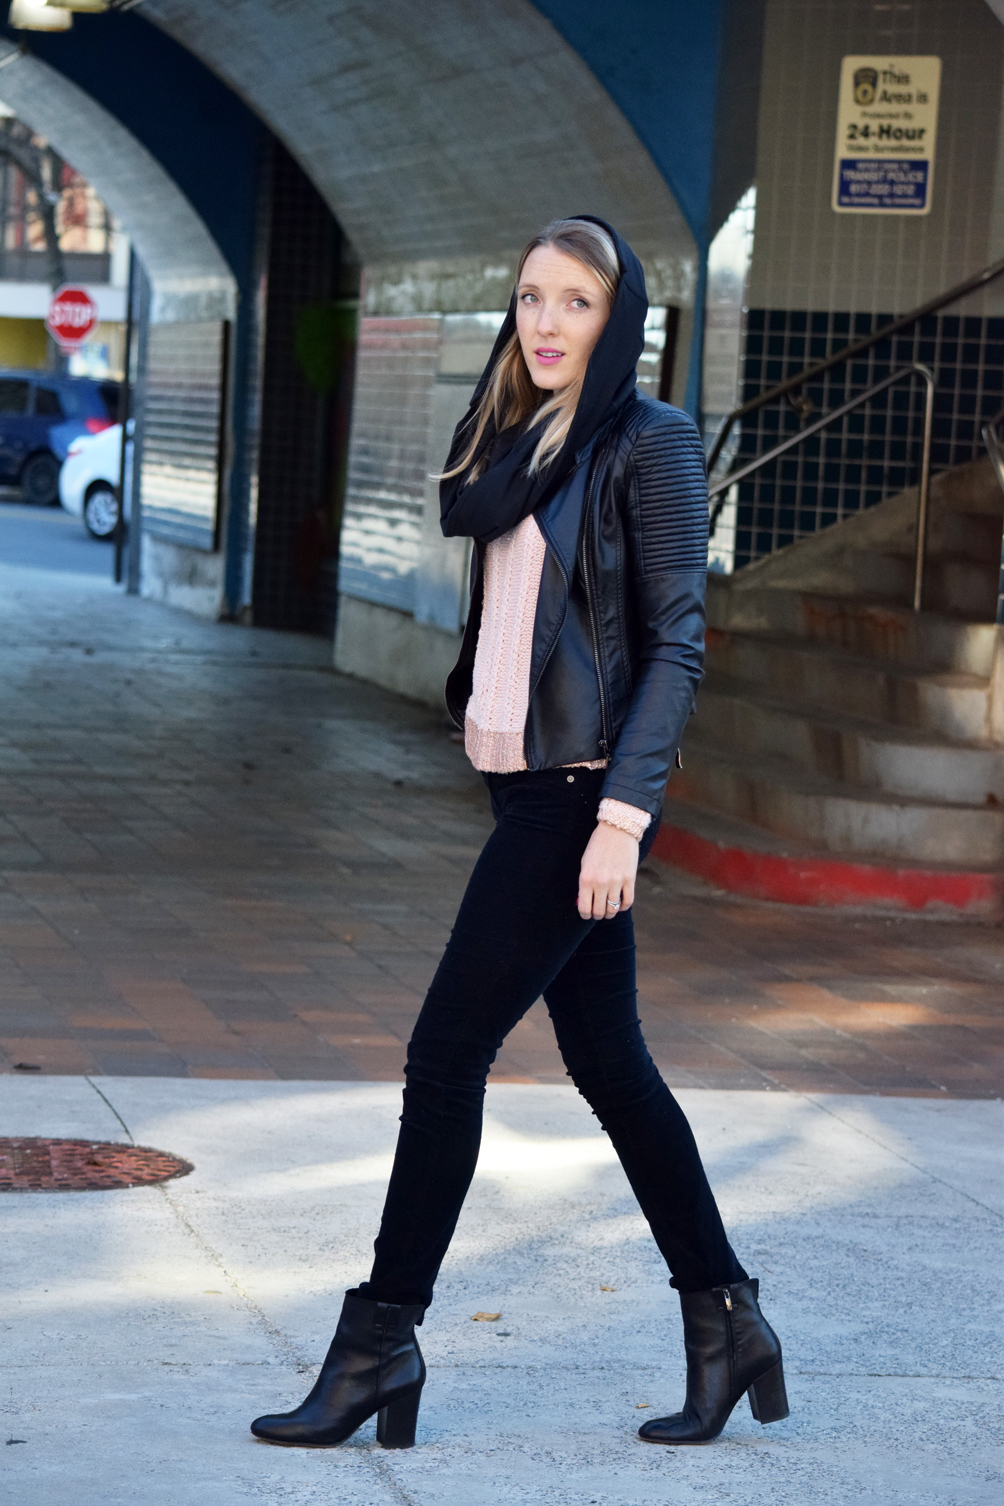 chic winter outerwear with a snood and leather jacket